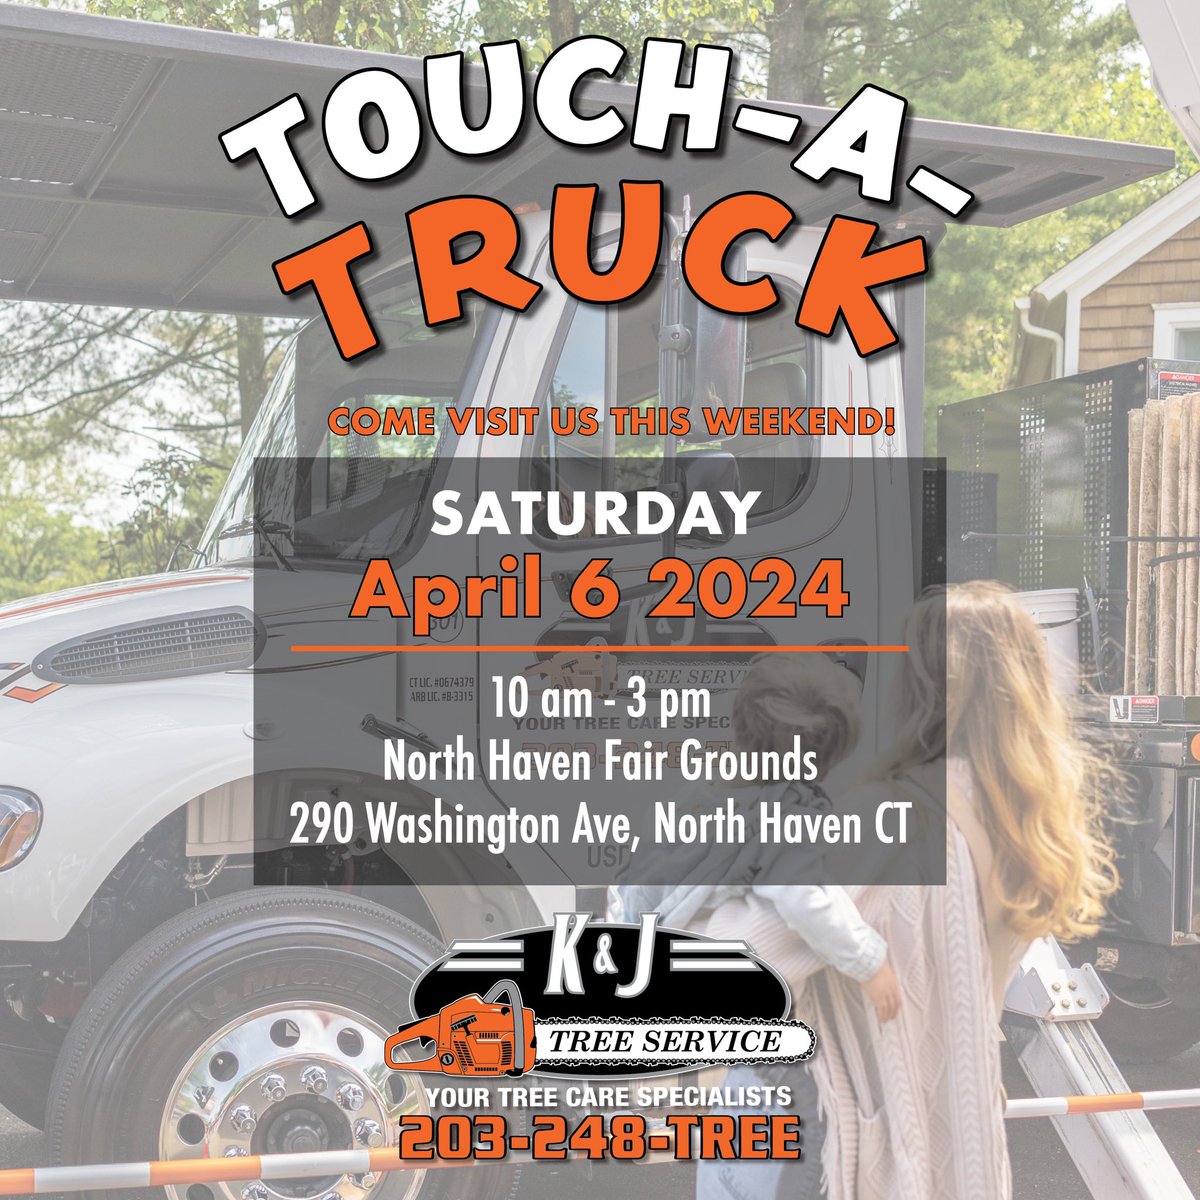 Come visit us this Saturday at the North Haven Fair Grounds! Our first Touch-A-Truck of the year, with Build Something INC. hope to see you there!
-
-
#community #touchatruck #communityevent #northhaven #northhavenct #fairfieldcounty #newhavencounty  #familyfirst